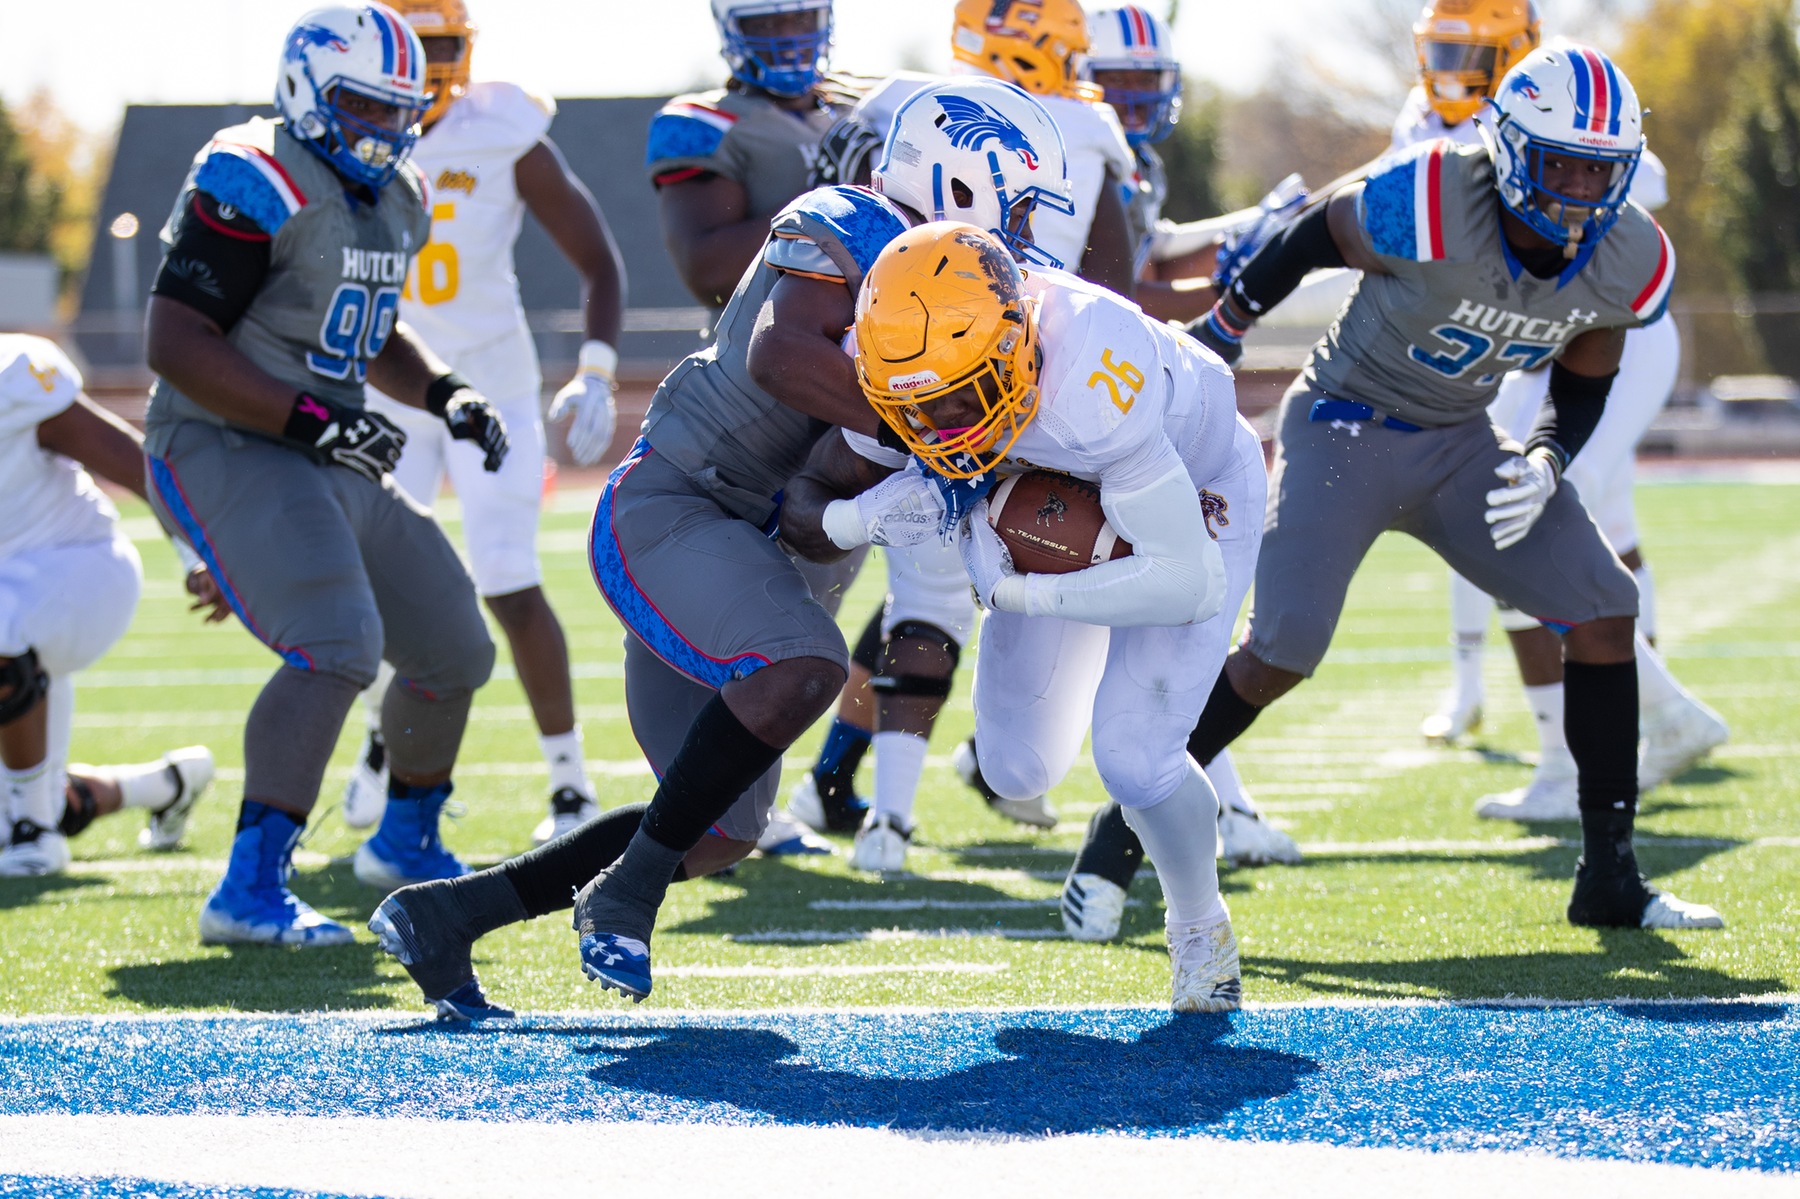 Broncbusters clinch share of Jayhawk Conference title with last-second victory